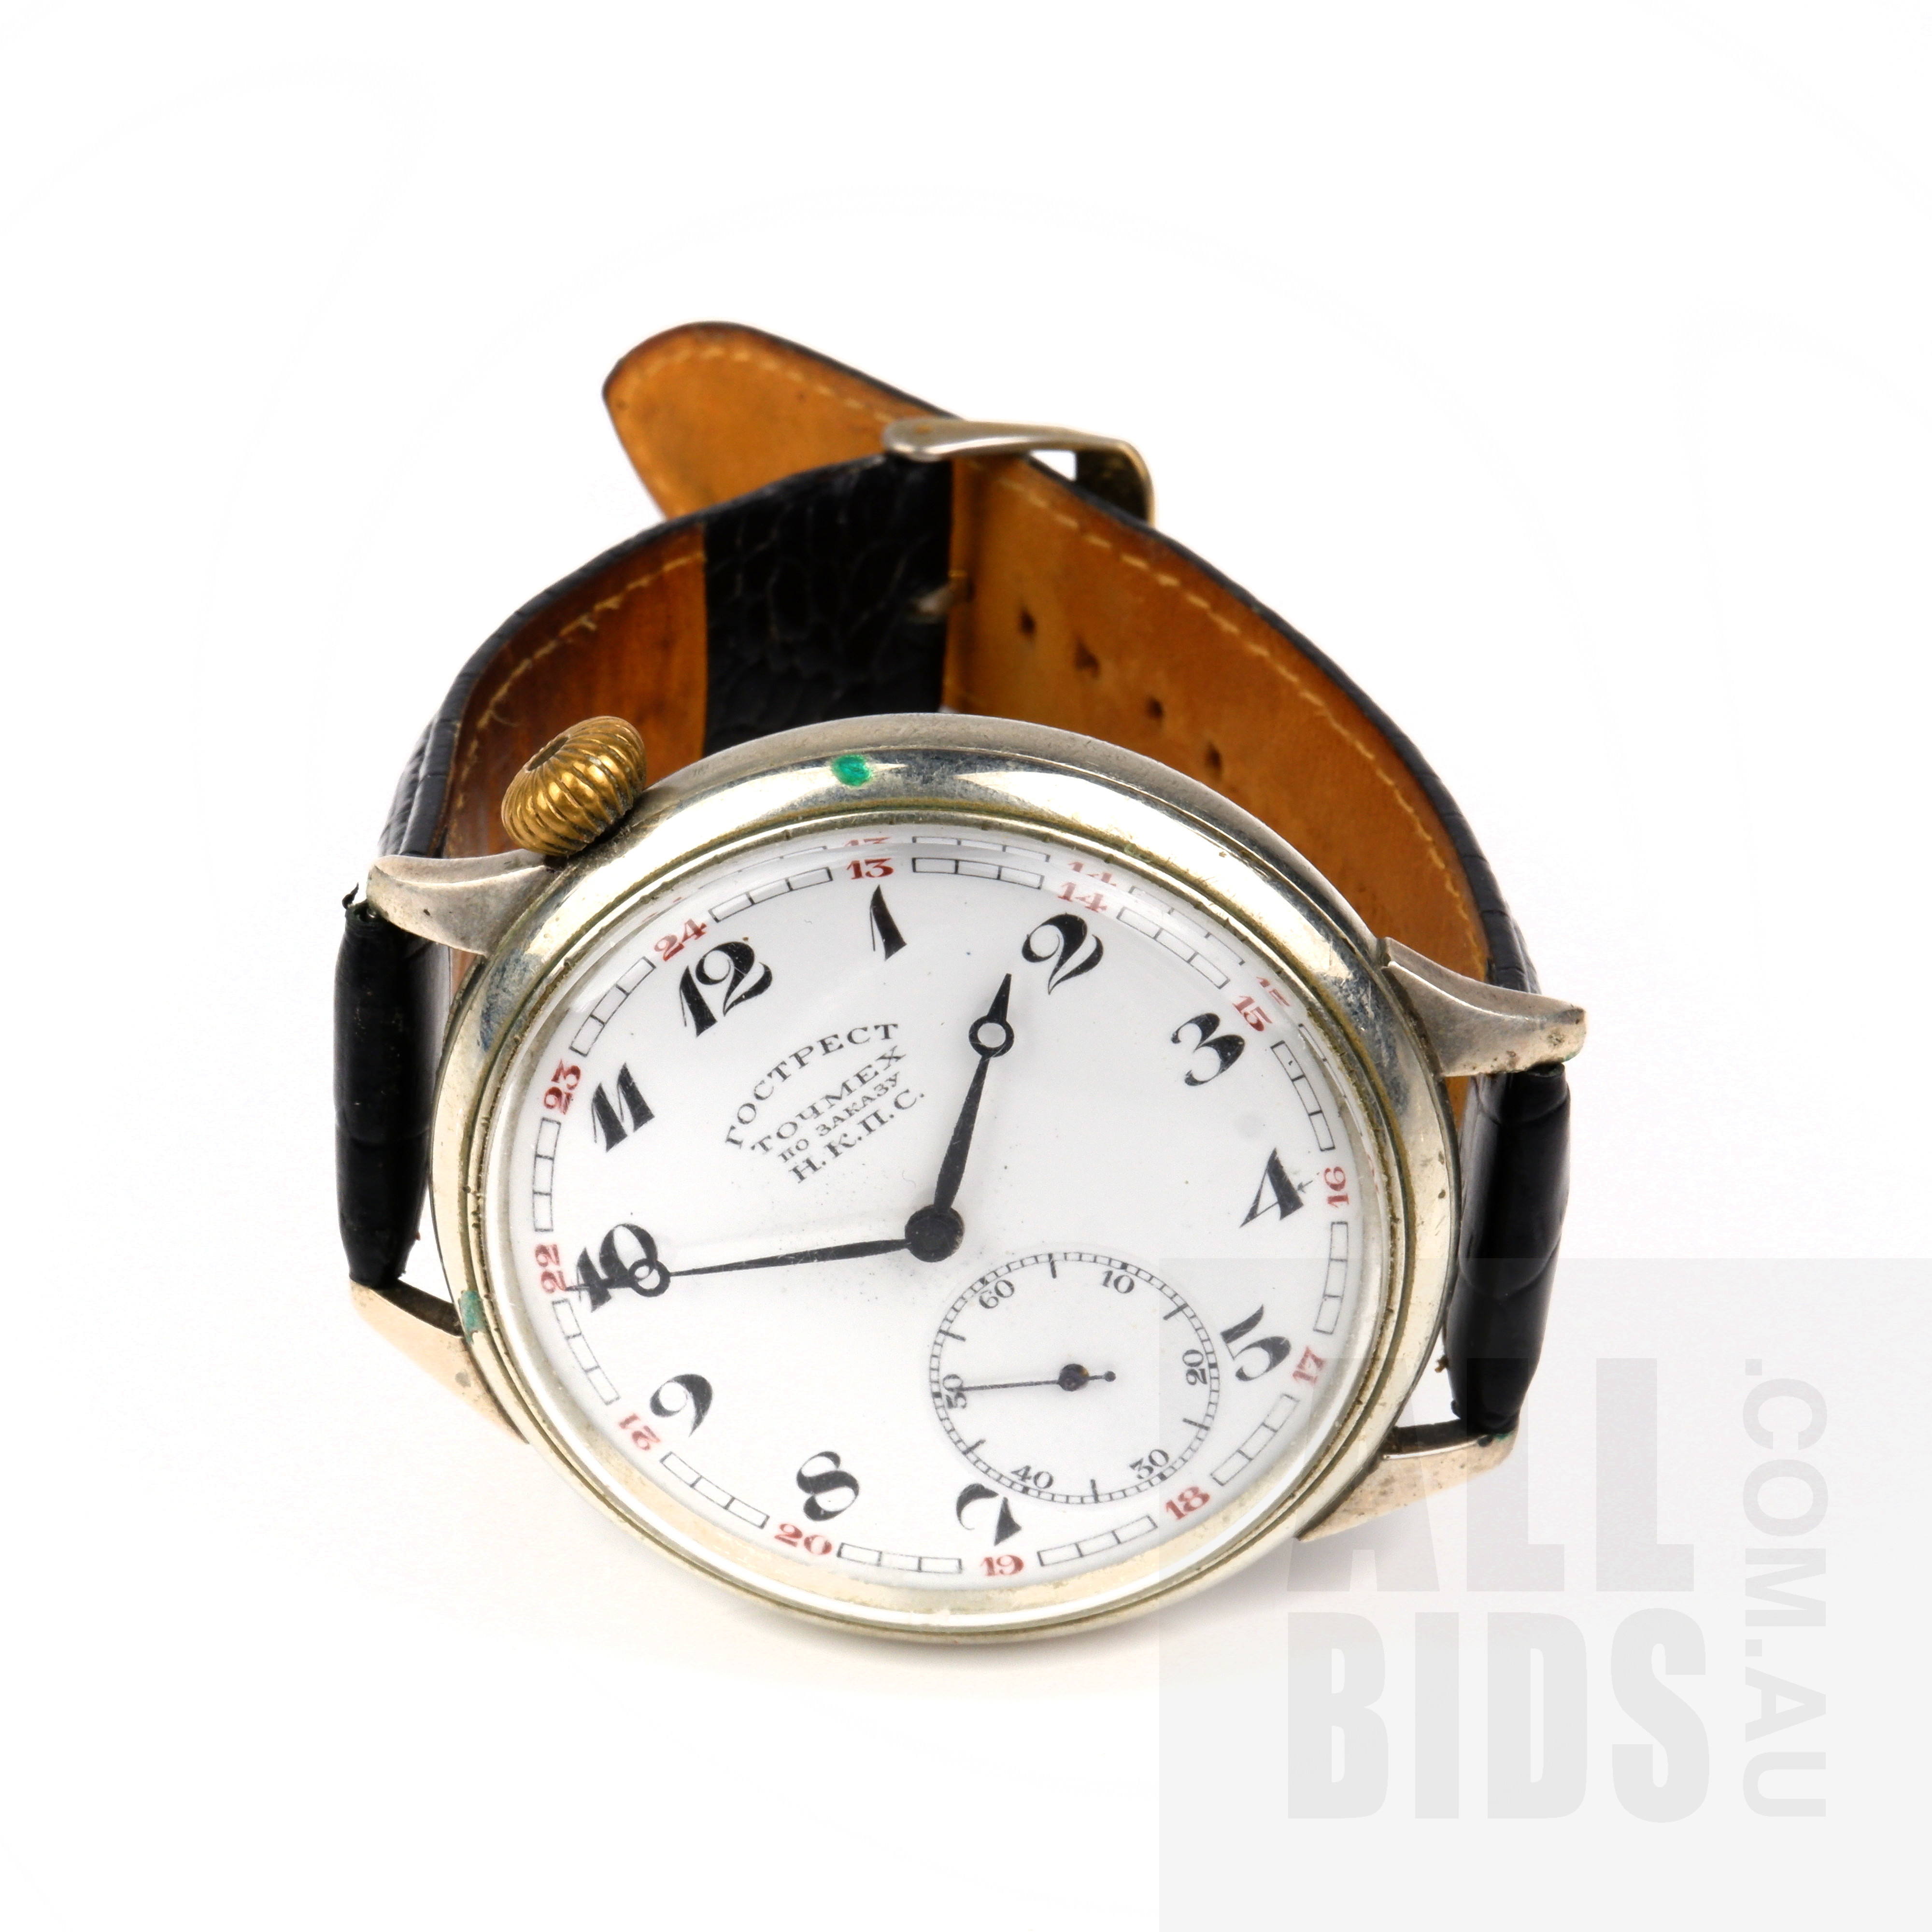 'Rare Russian Gostrest Tochmech Moscow Mens Wristwatch Commissioned By Peoples Commissariat of Railways'